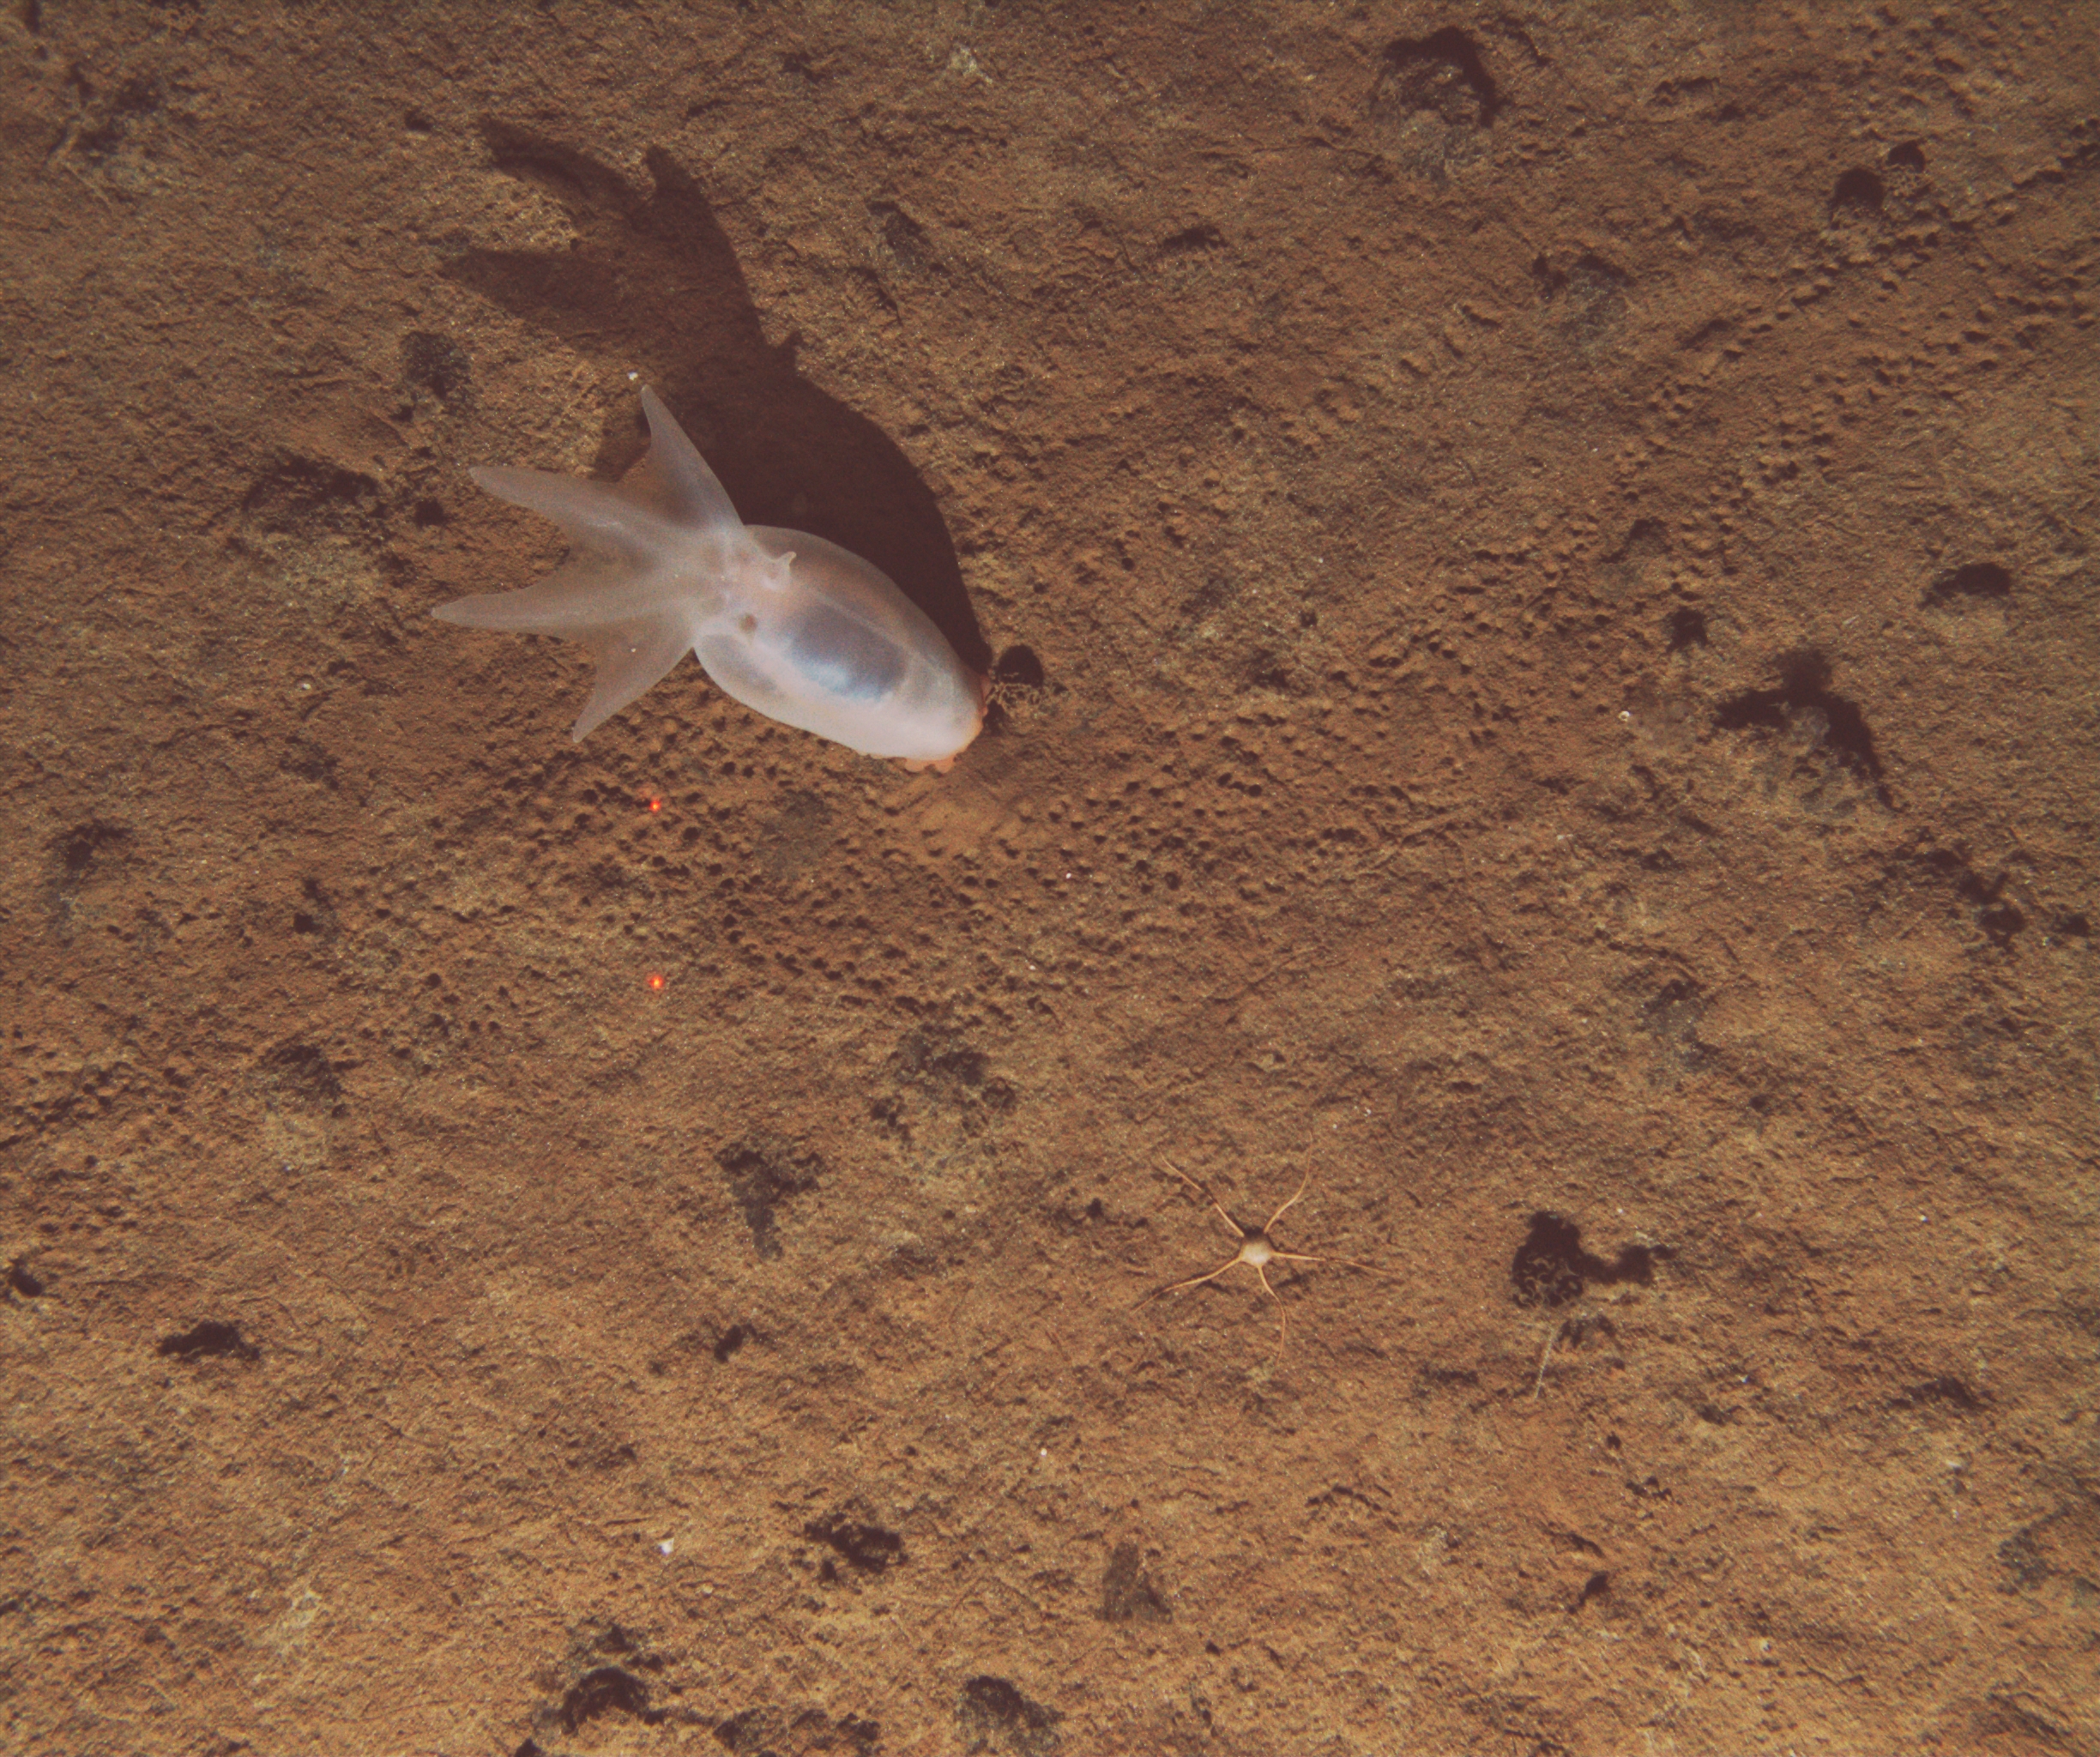 An Amperima sea cucumber wandering on an abyssal plain of the Pacific Ocean (-4000 m). This is a typical image of the seabed viewed from above, used to conduct ecological surveys in abyssal plains. Note the spread between the two red lasers, scaling 10 centimeters. (C) SMARTEX, NOC